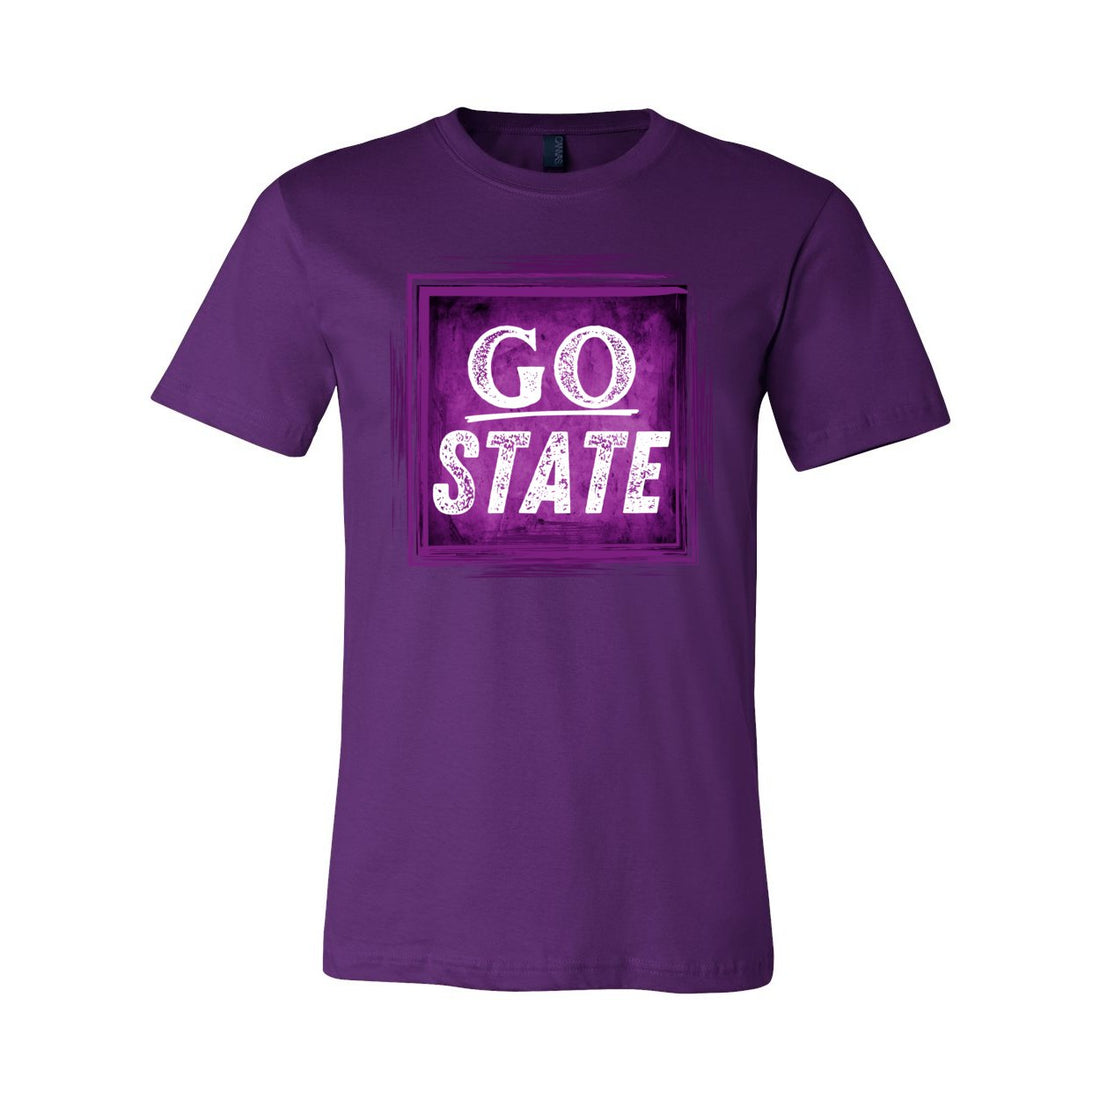 Go State Short Sleeve Jersey Tee - T-Shirts - Positively Sassy - Go State Short Sleeve Jersey Tee